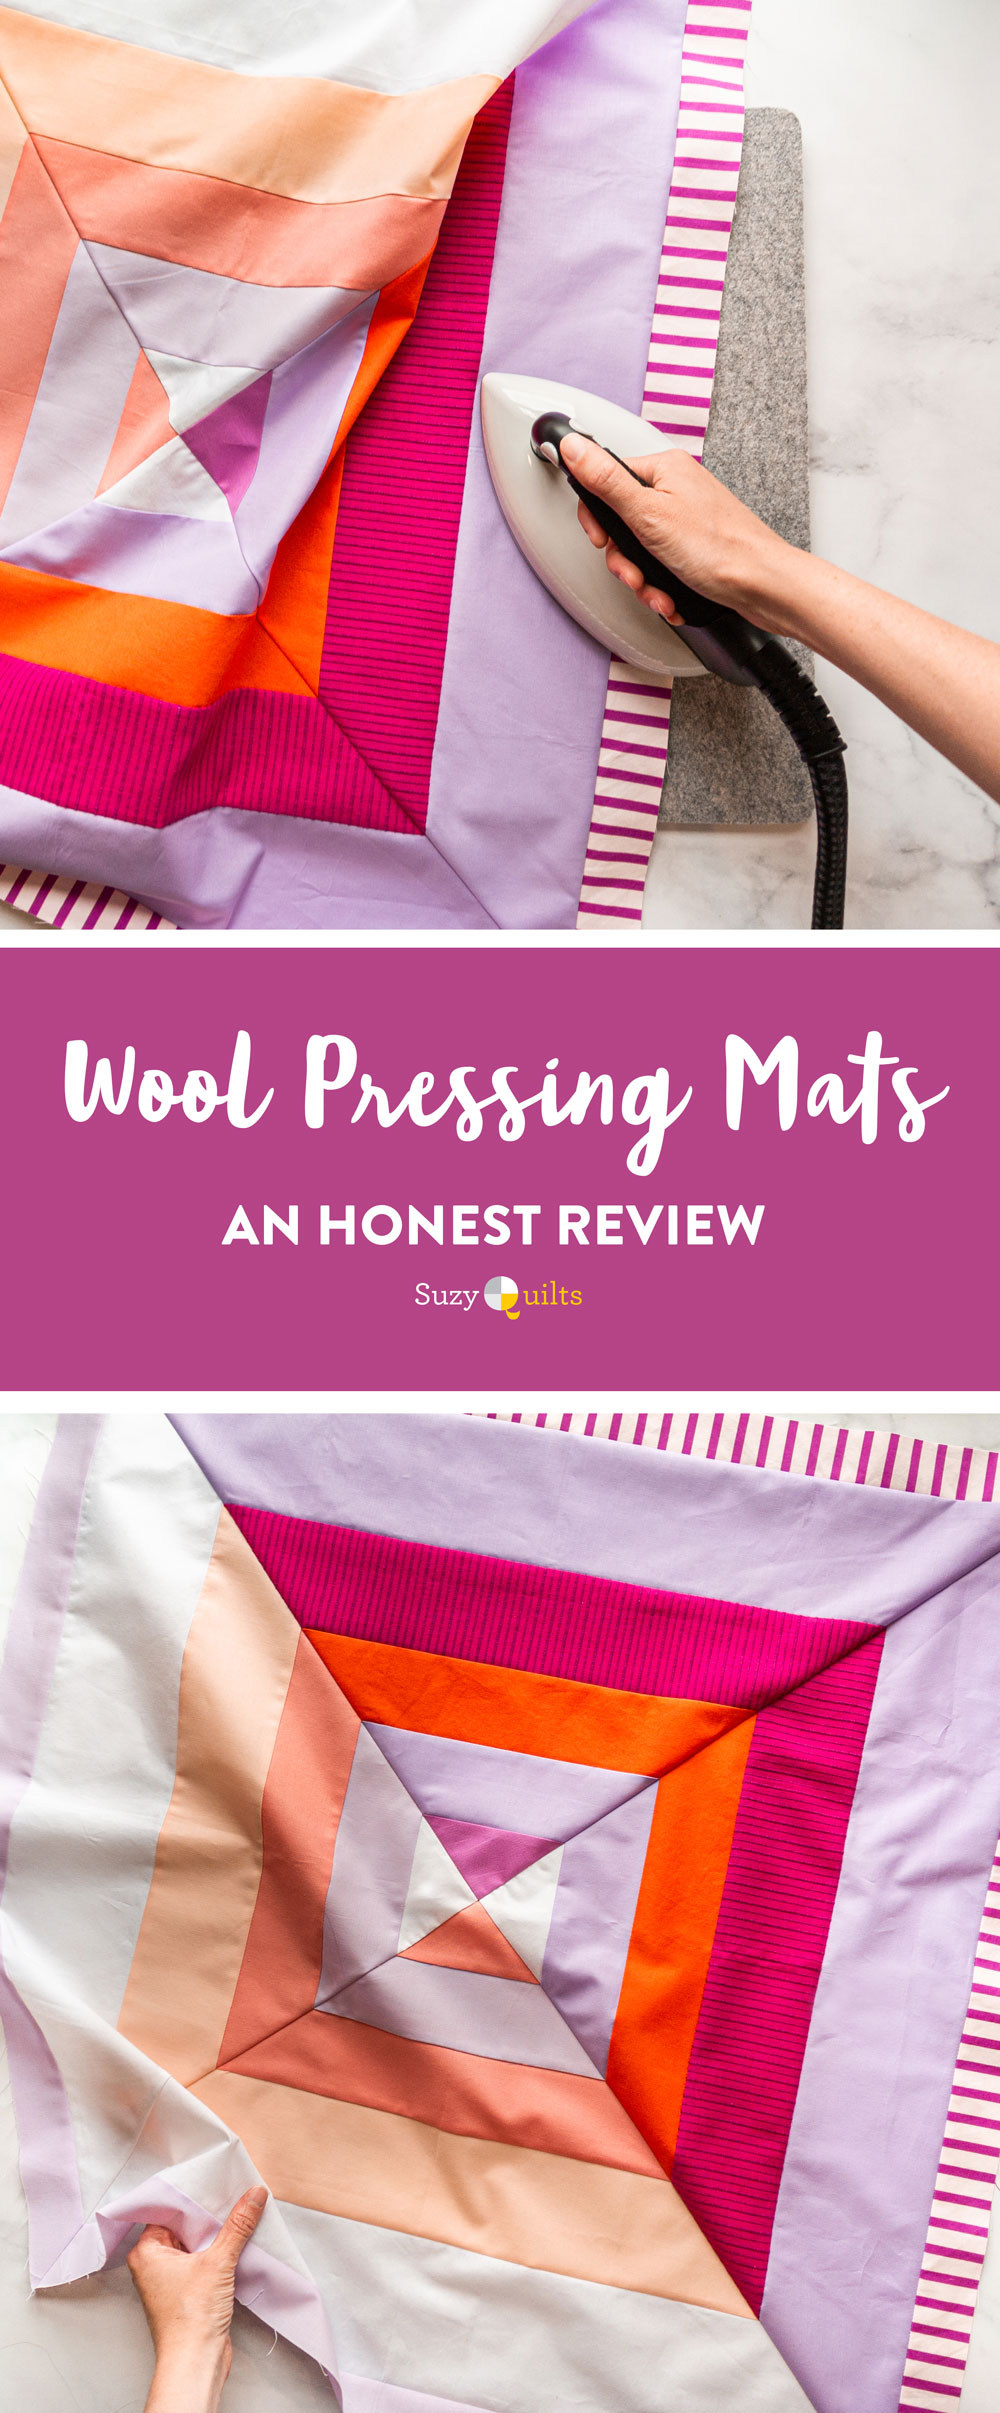 An Honest Review of Wool Pressing Mats - Suzy Quilts